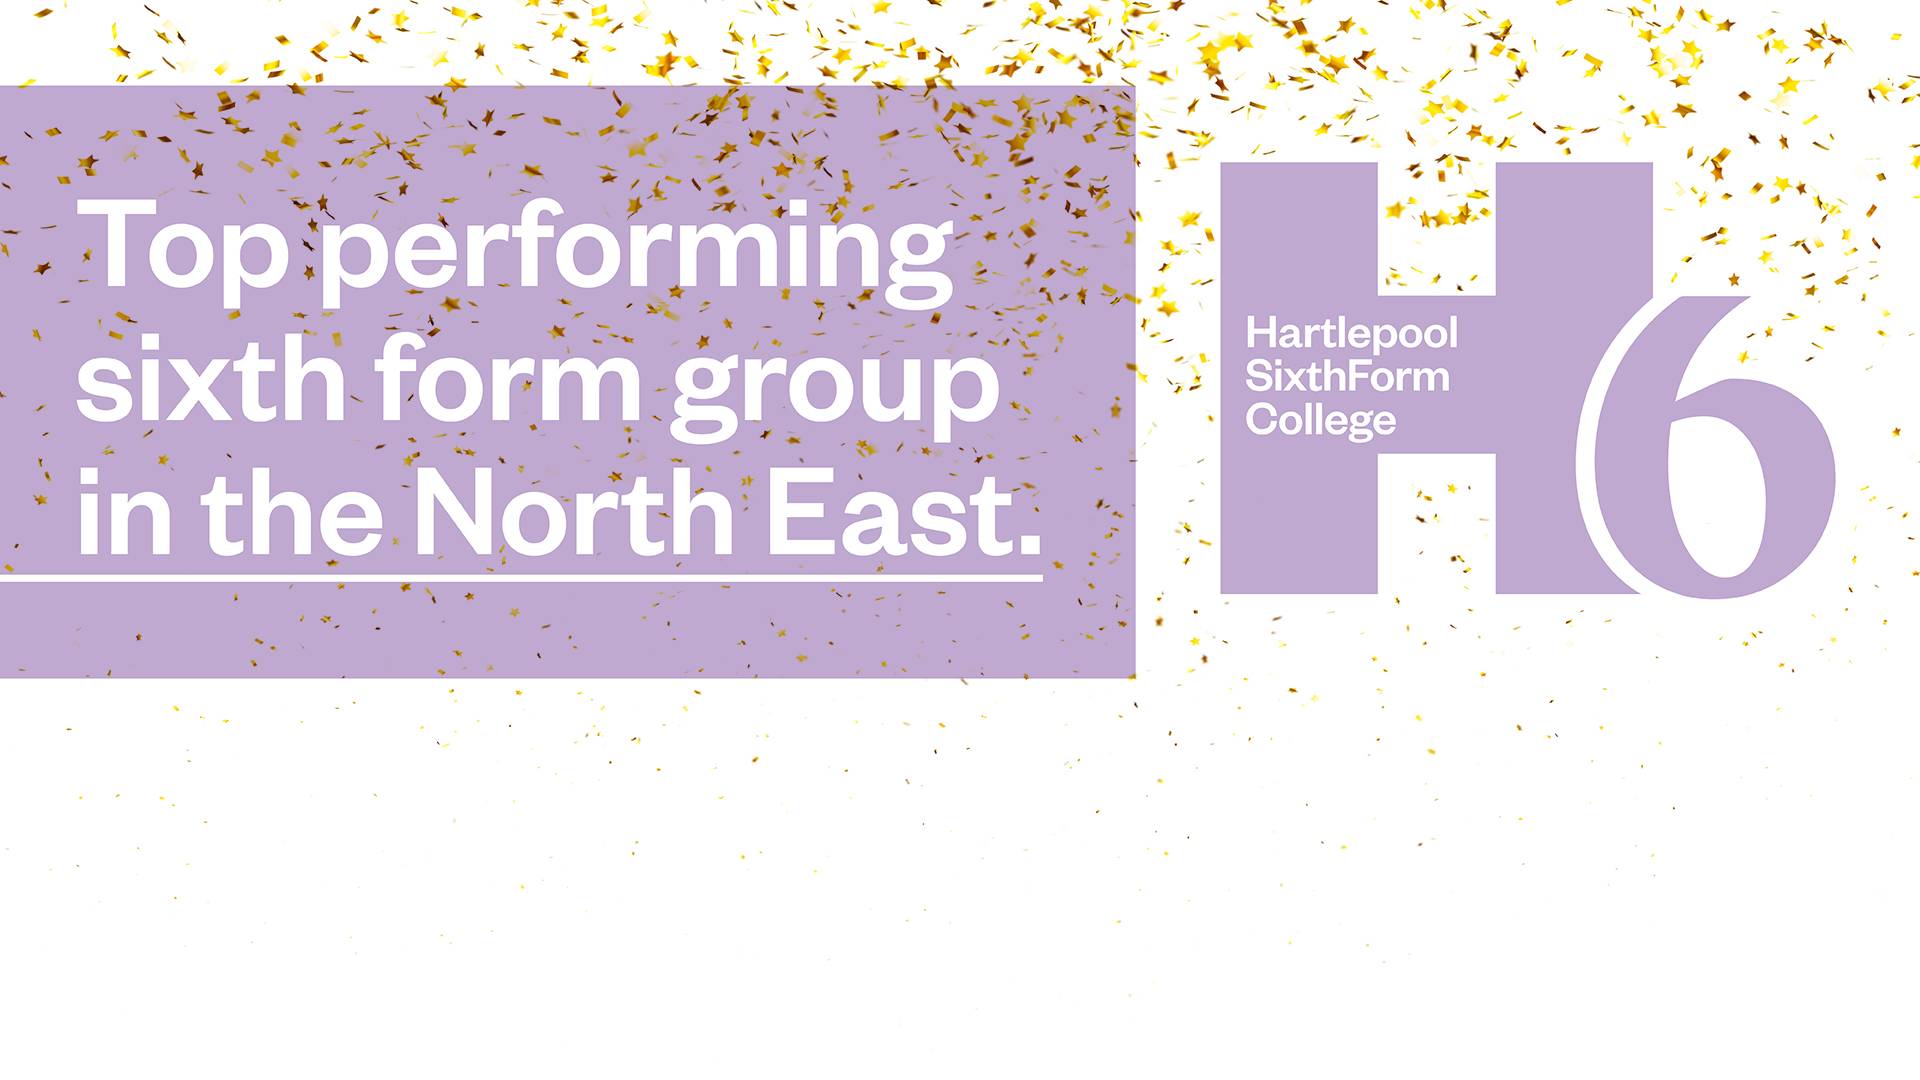 Top performing sixth form group in the North East